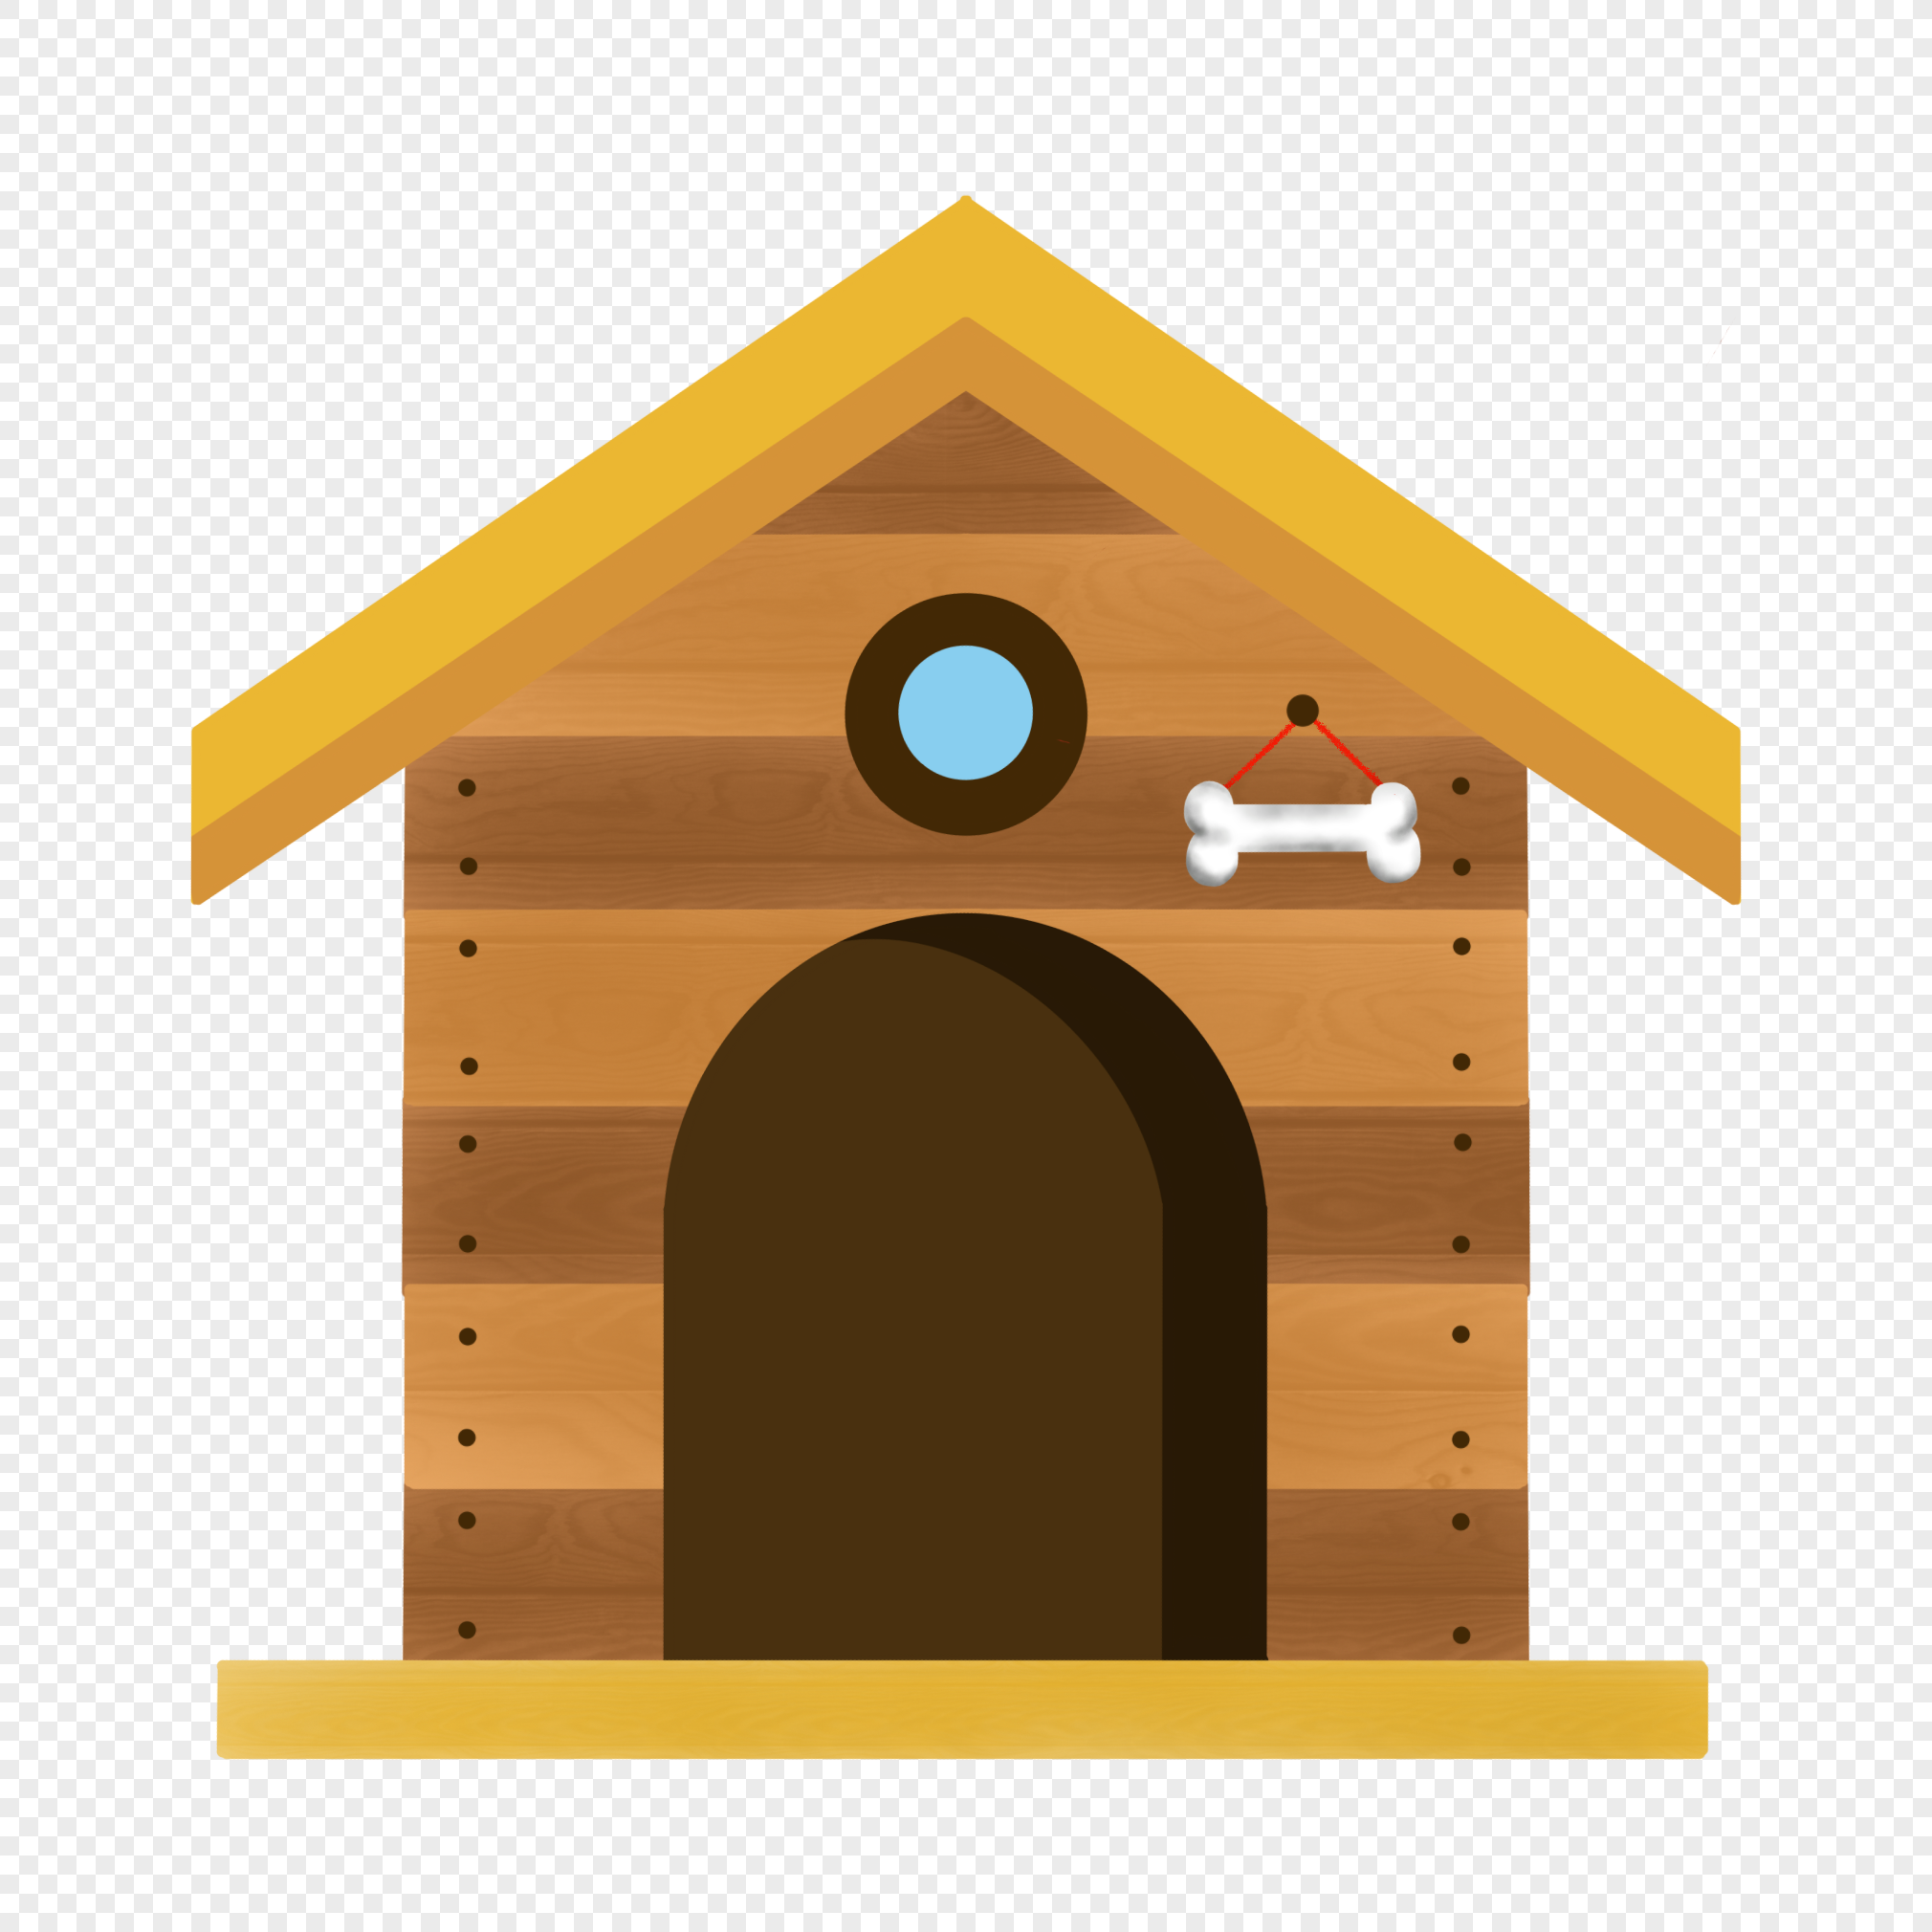 Dog House Images, HD Pictures For Free Vectors Download 